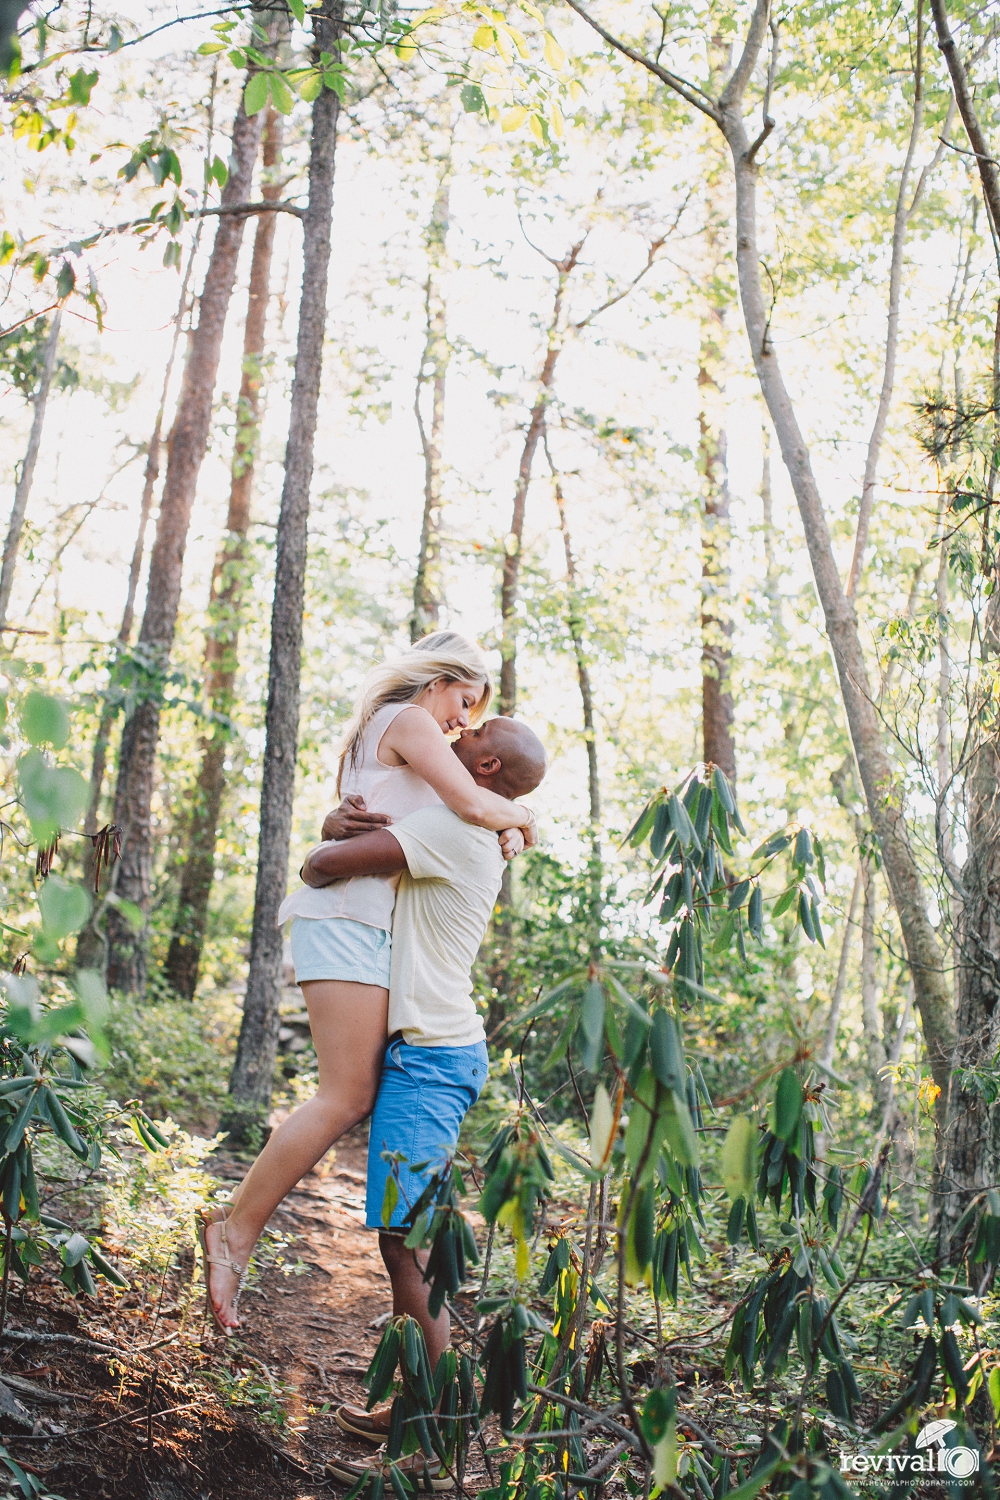 Vanessa + Patrick's Engagement Adventure at Hanging Rock State Park by Revival Photography www.revivalphotography.com